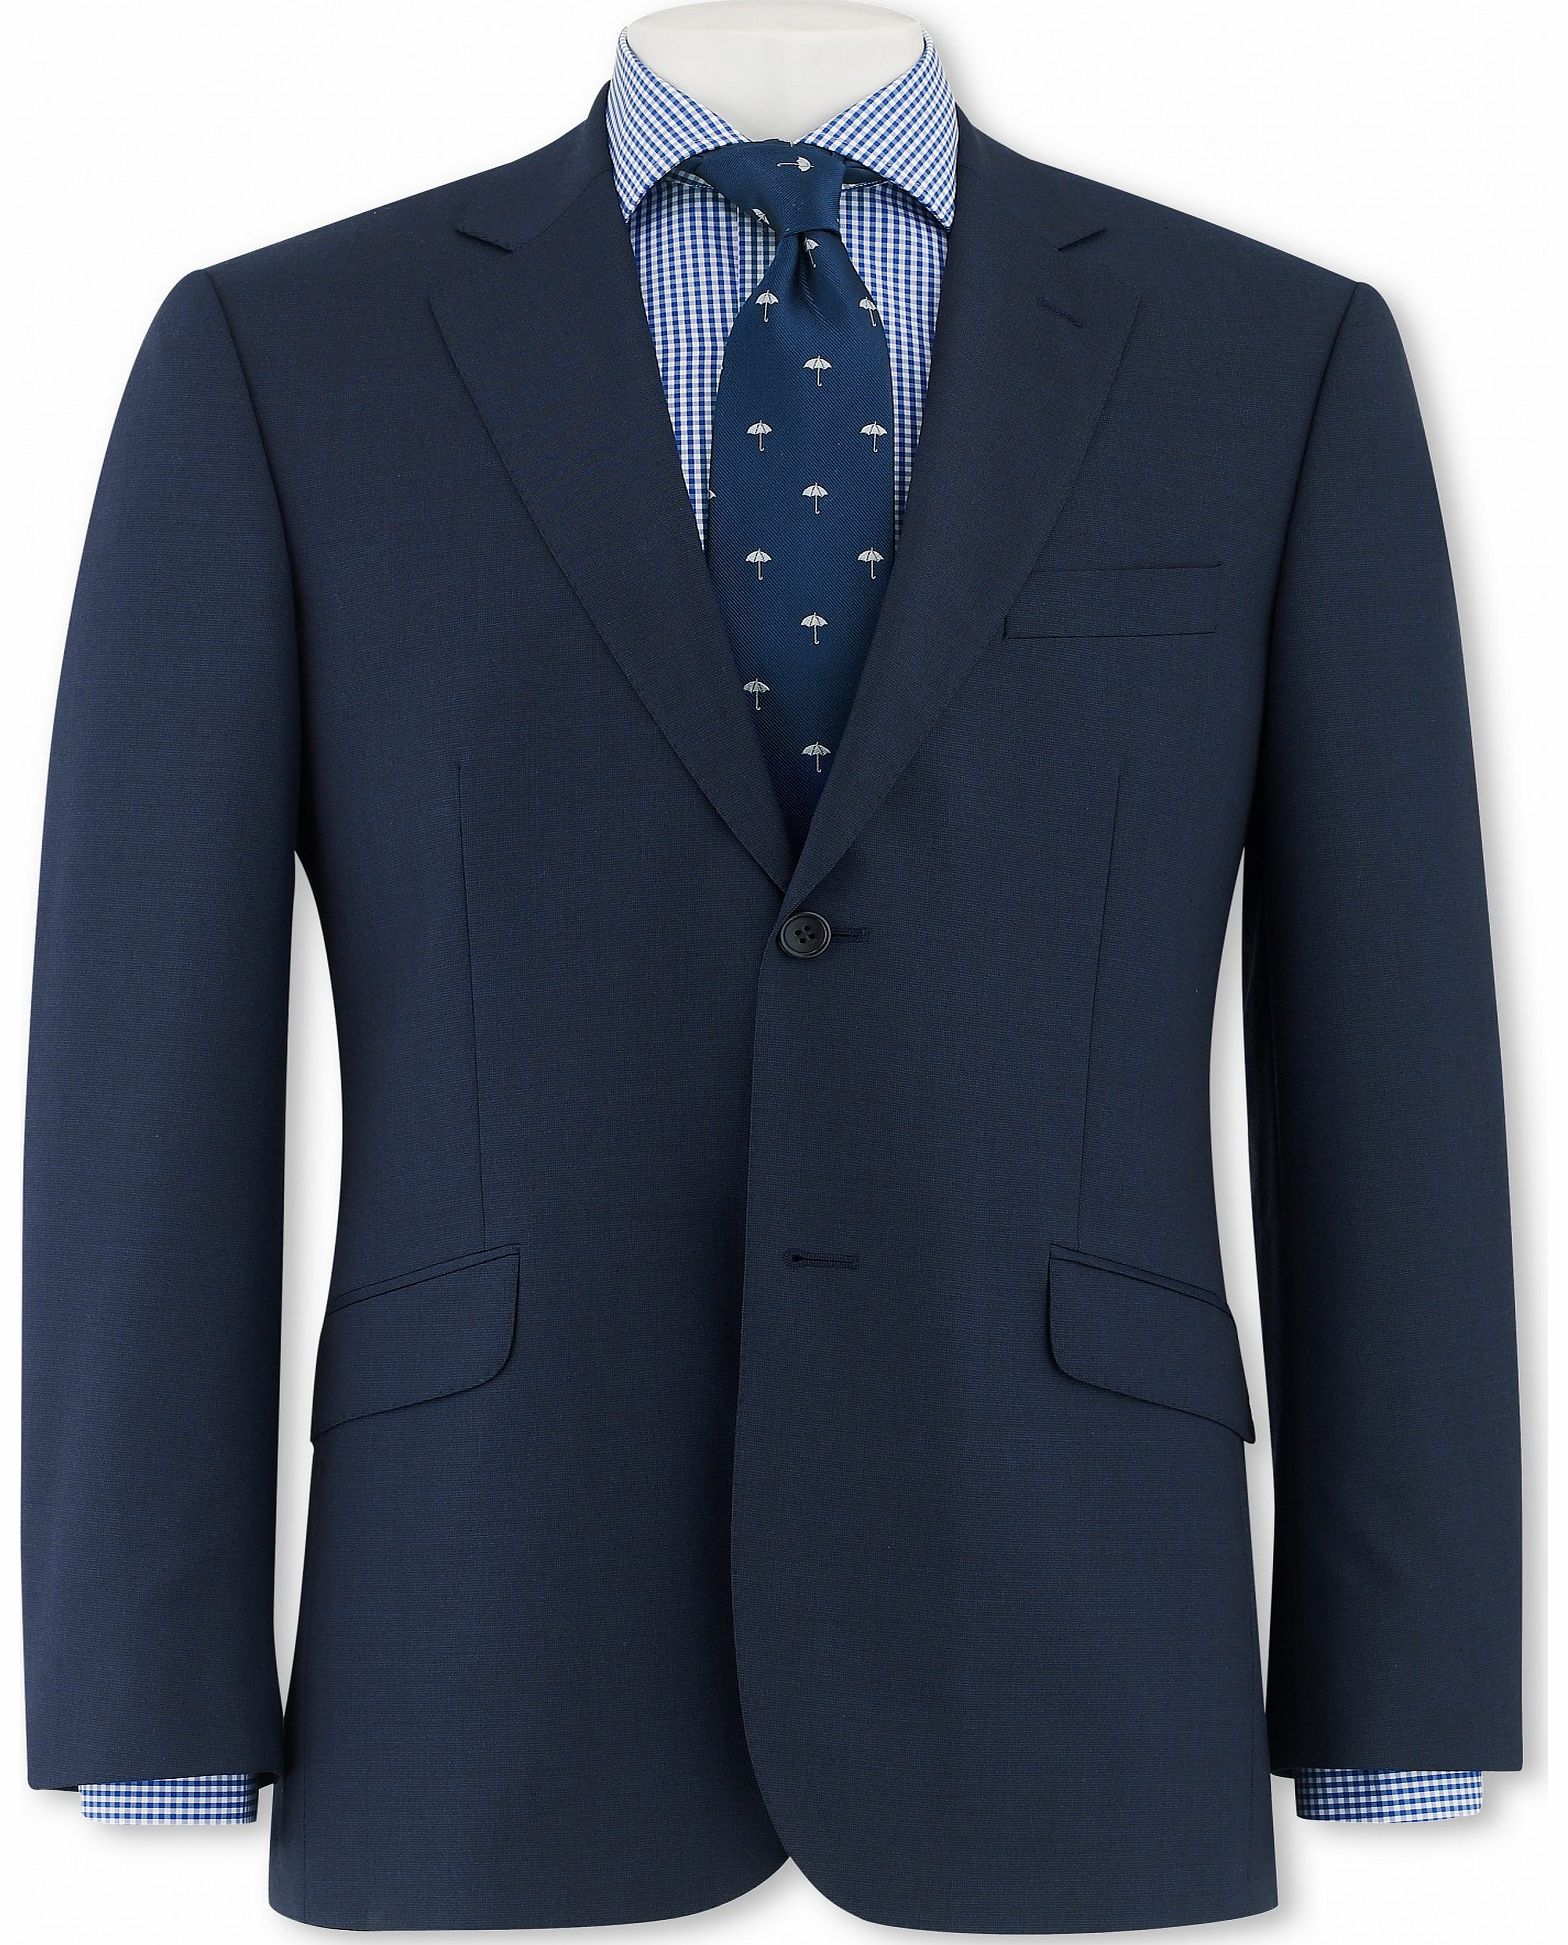 Navy Microdot Suit Jacket 52`` Long